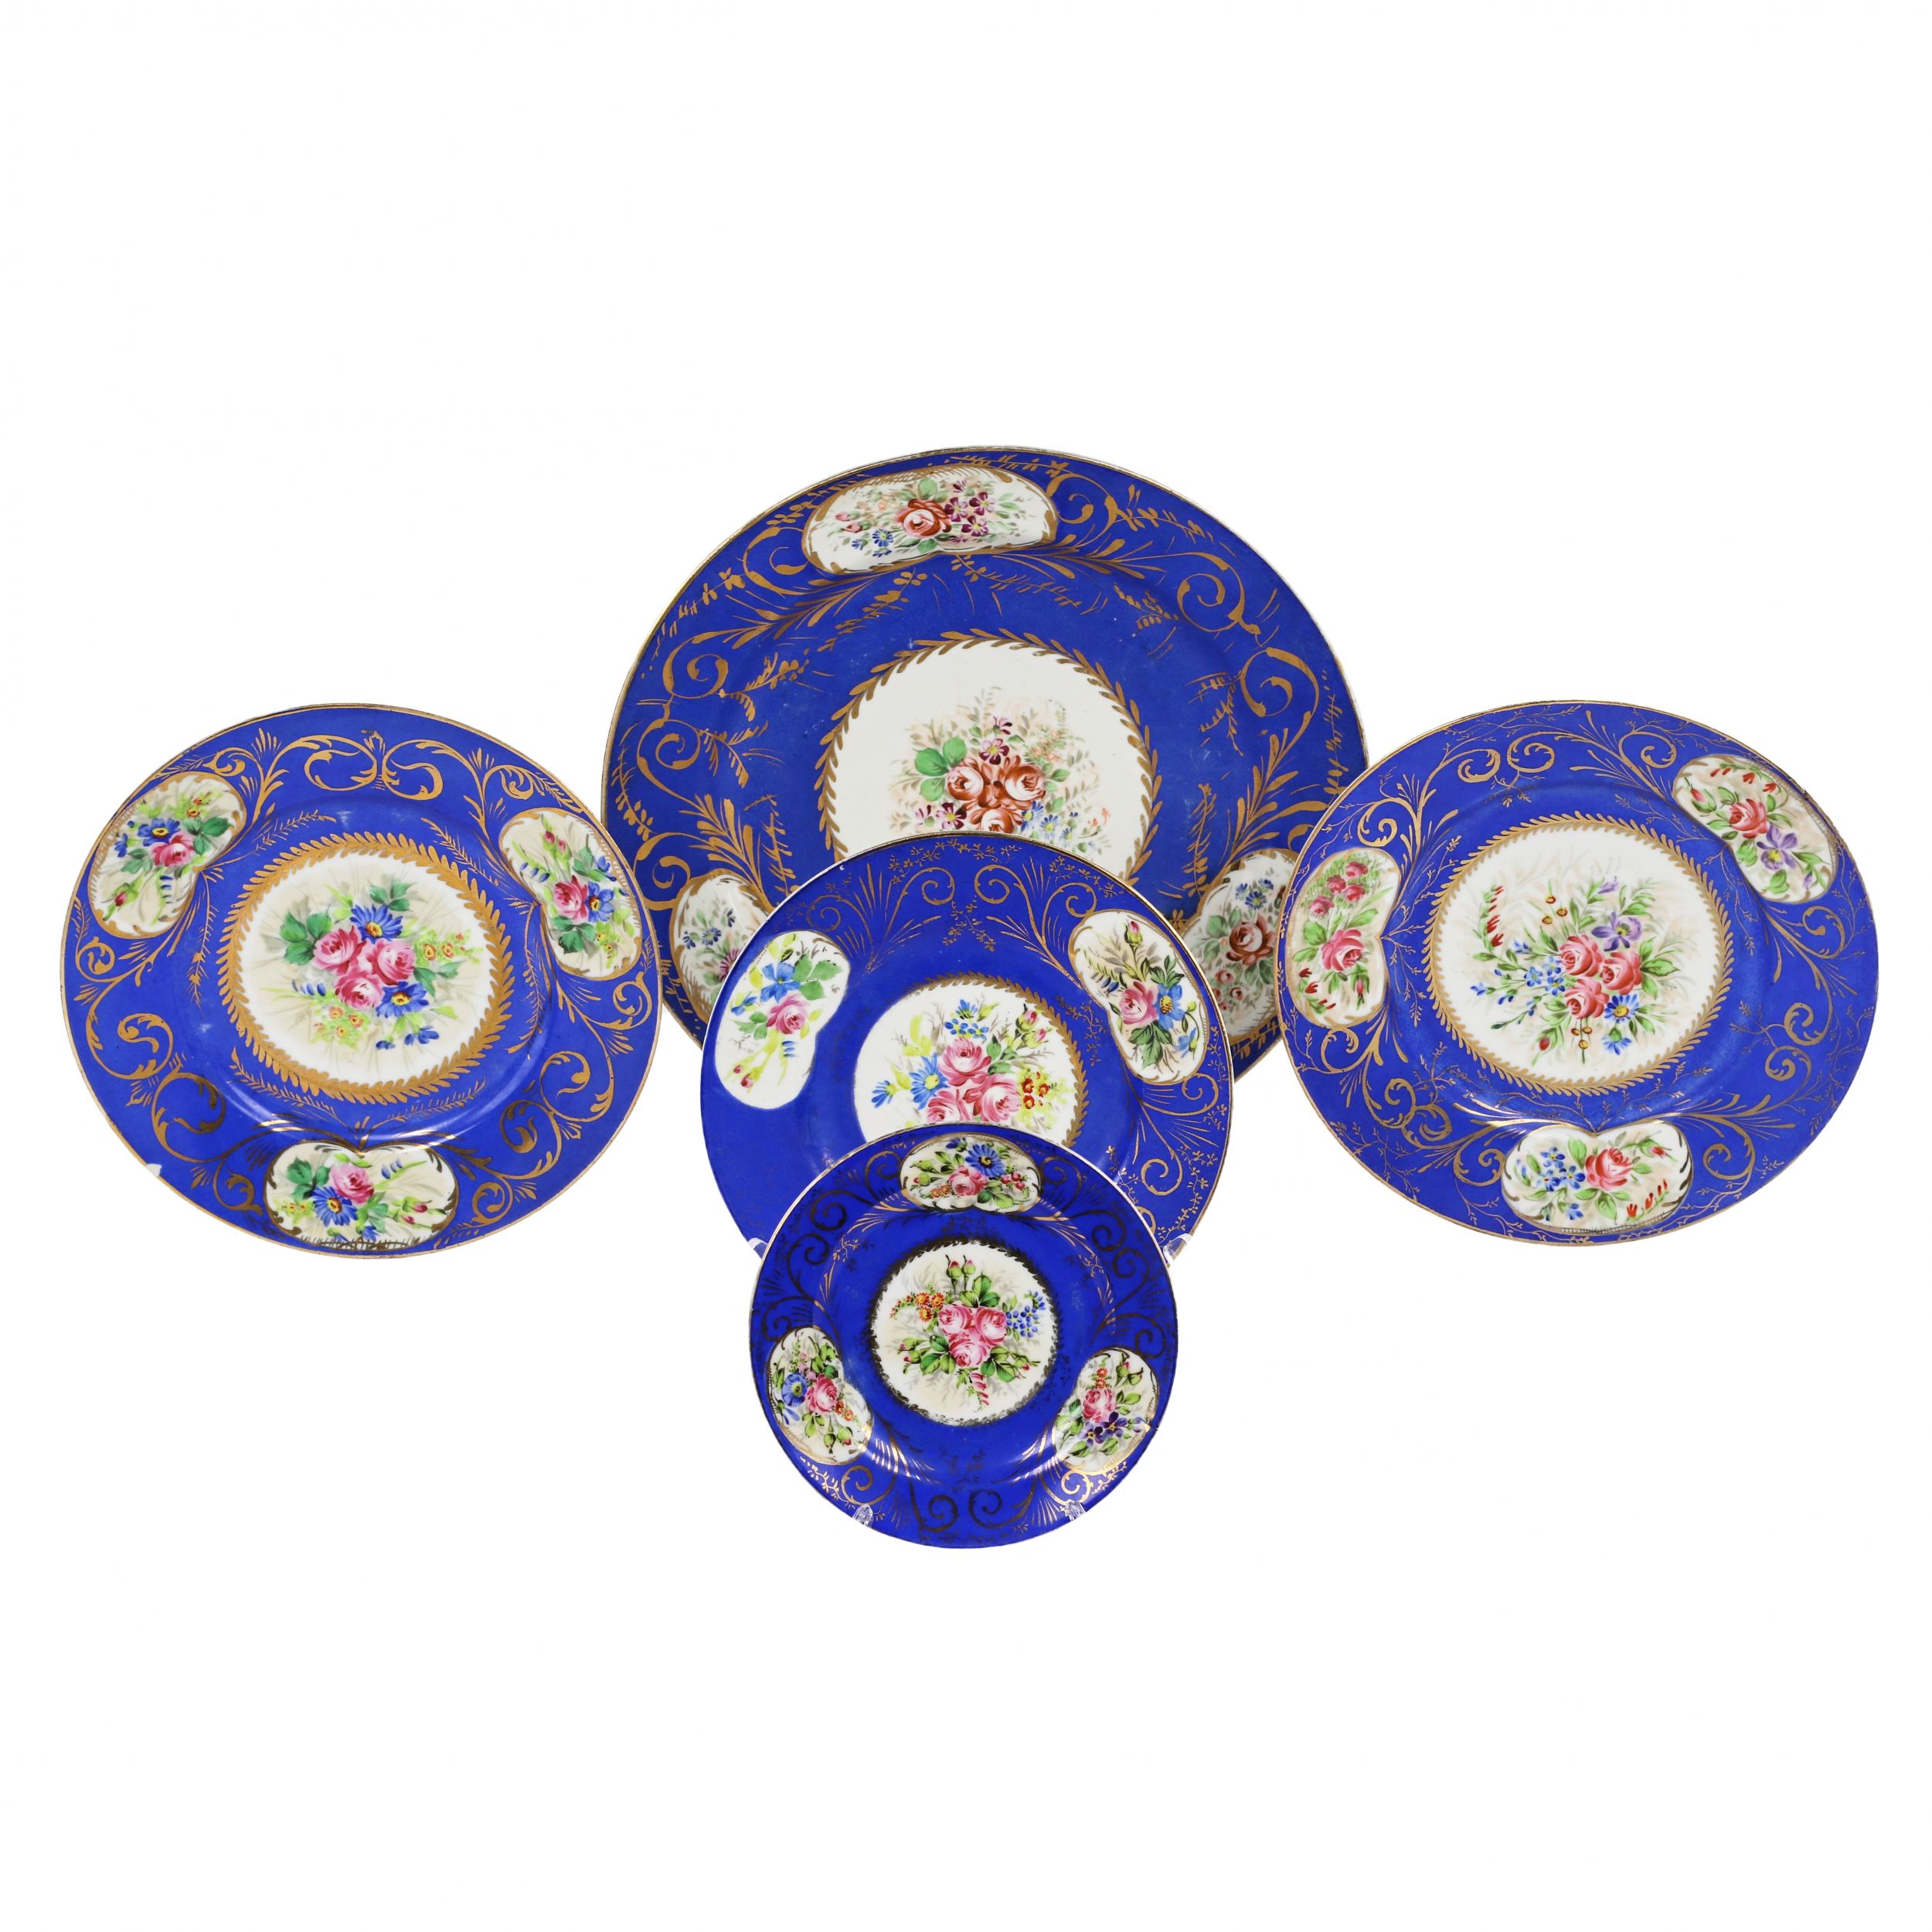 Five-dishes-and-plates-from-Popov`s-factory-19th-century-